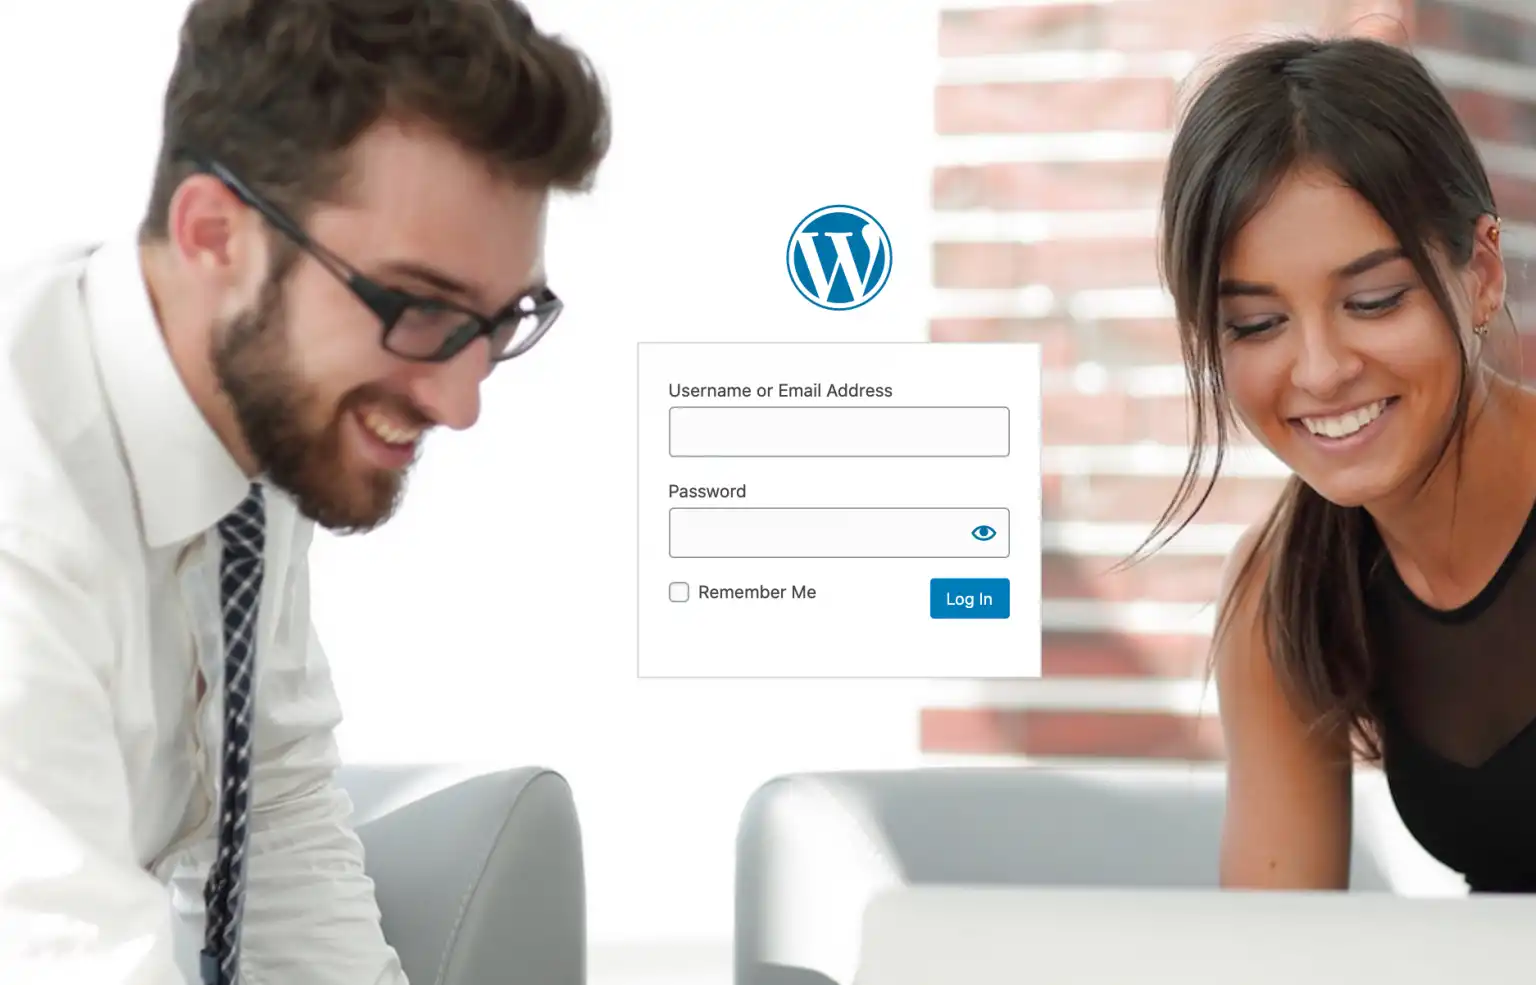 Man and woman working together on a laptop and smiling as background on the login page